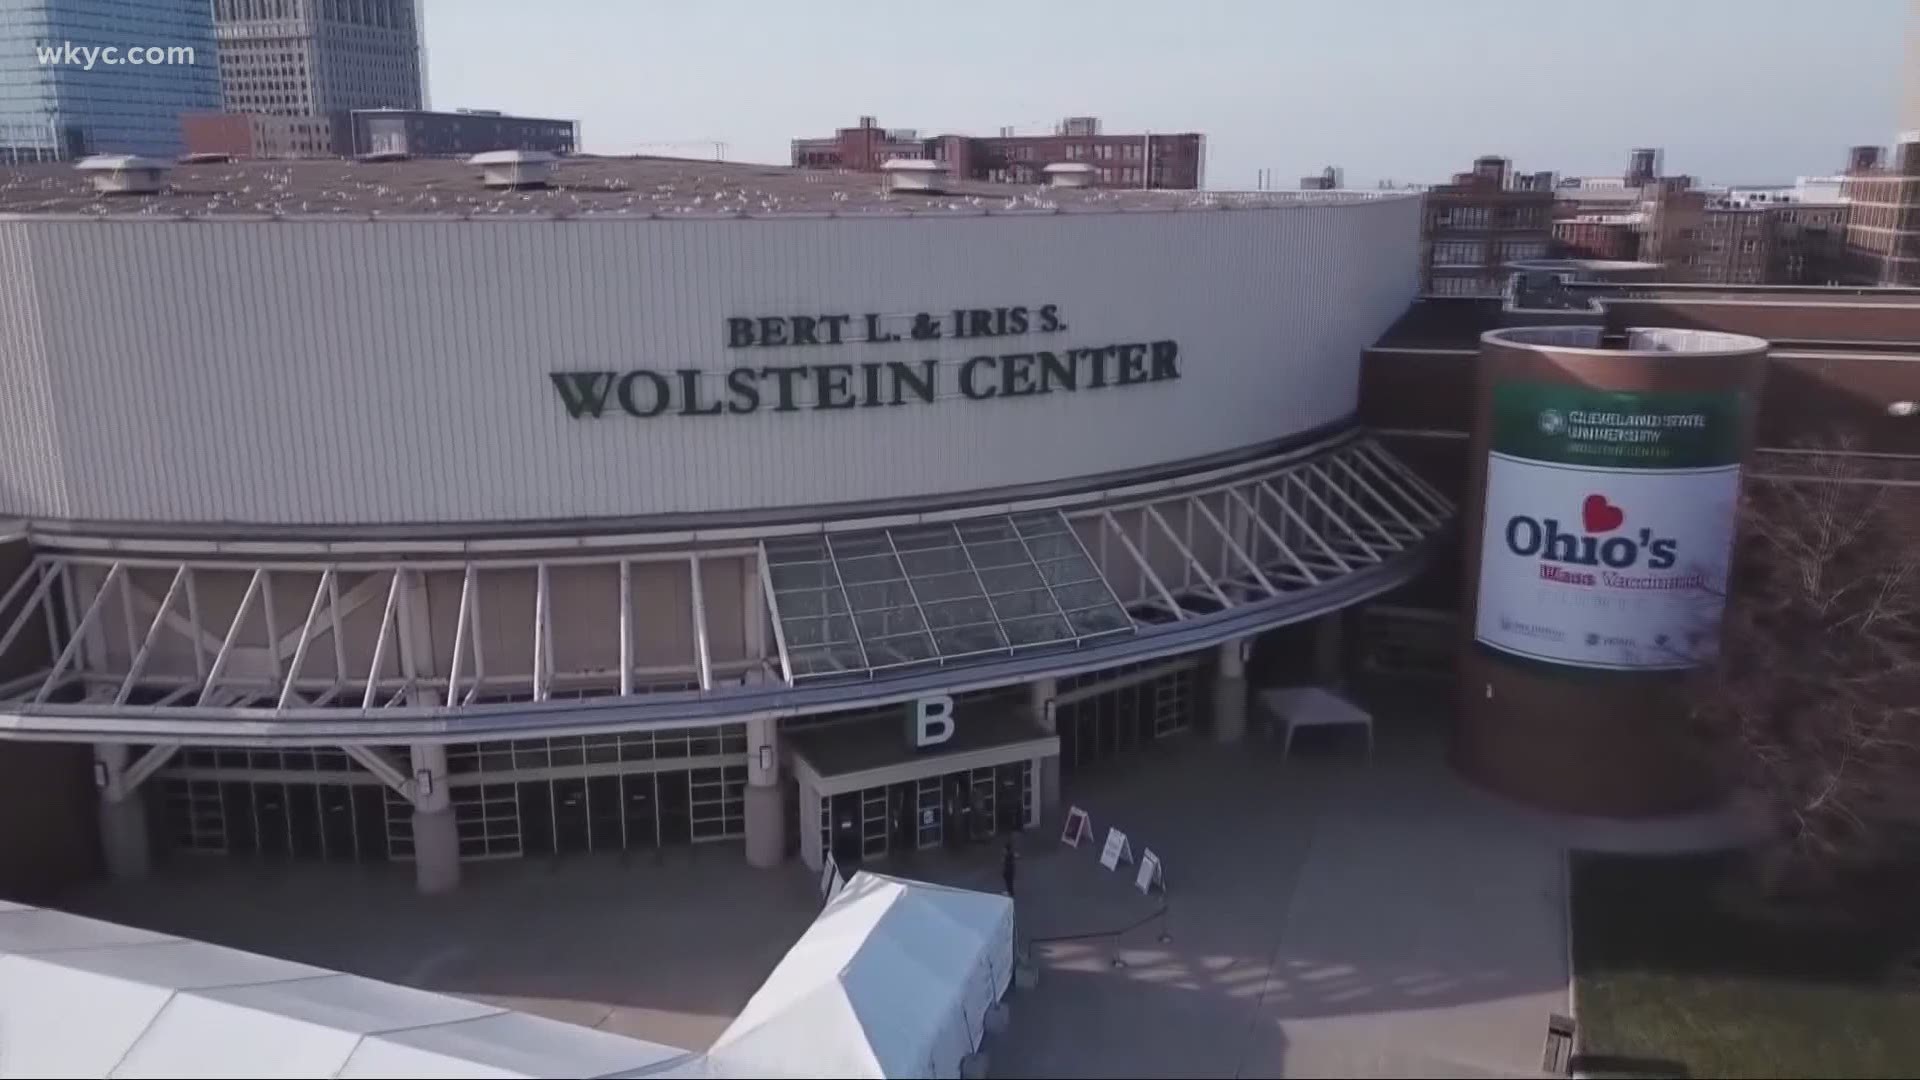 The arena, which served as Ohio's first mass vaccination site, is now clear of vaccines and gearing up for entertainment events.